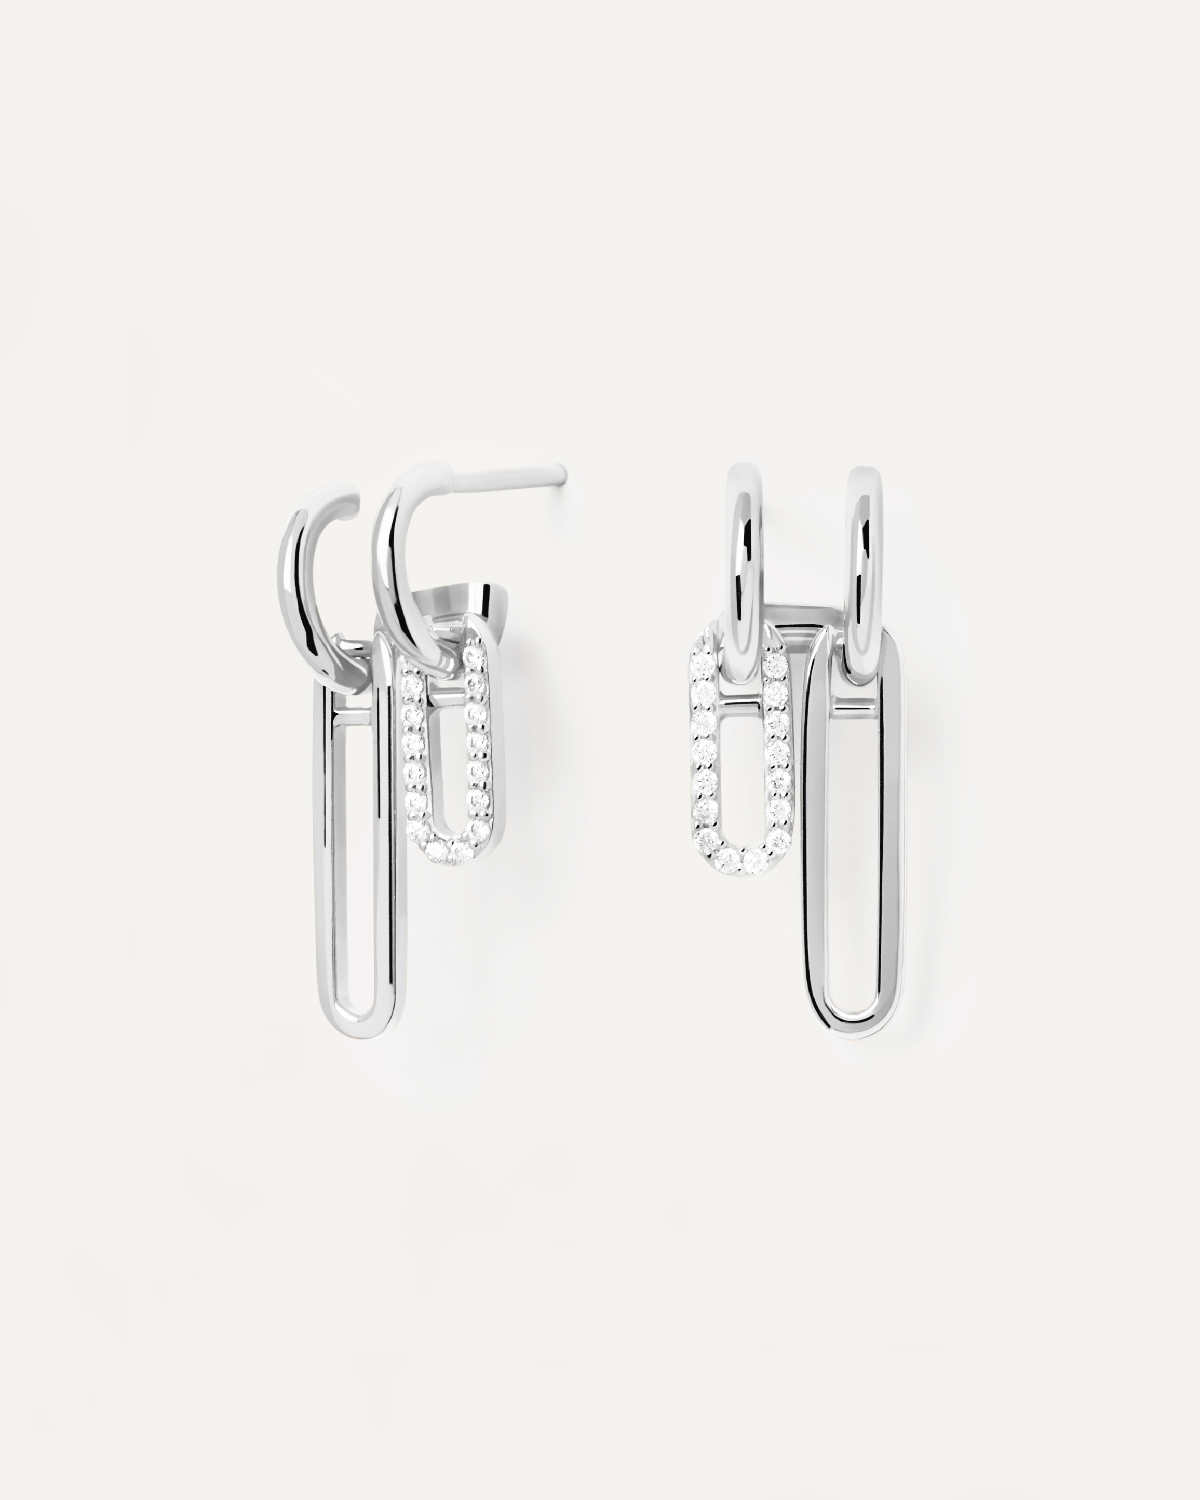 2023 Selection | Nexa Silver Earrings. Asymetric long earrings in 925 silver and white zirconia. Get the latest arrival from PDPAOLA. Place your order safely and get this Best Seller. Free Shipping.